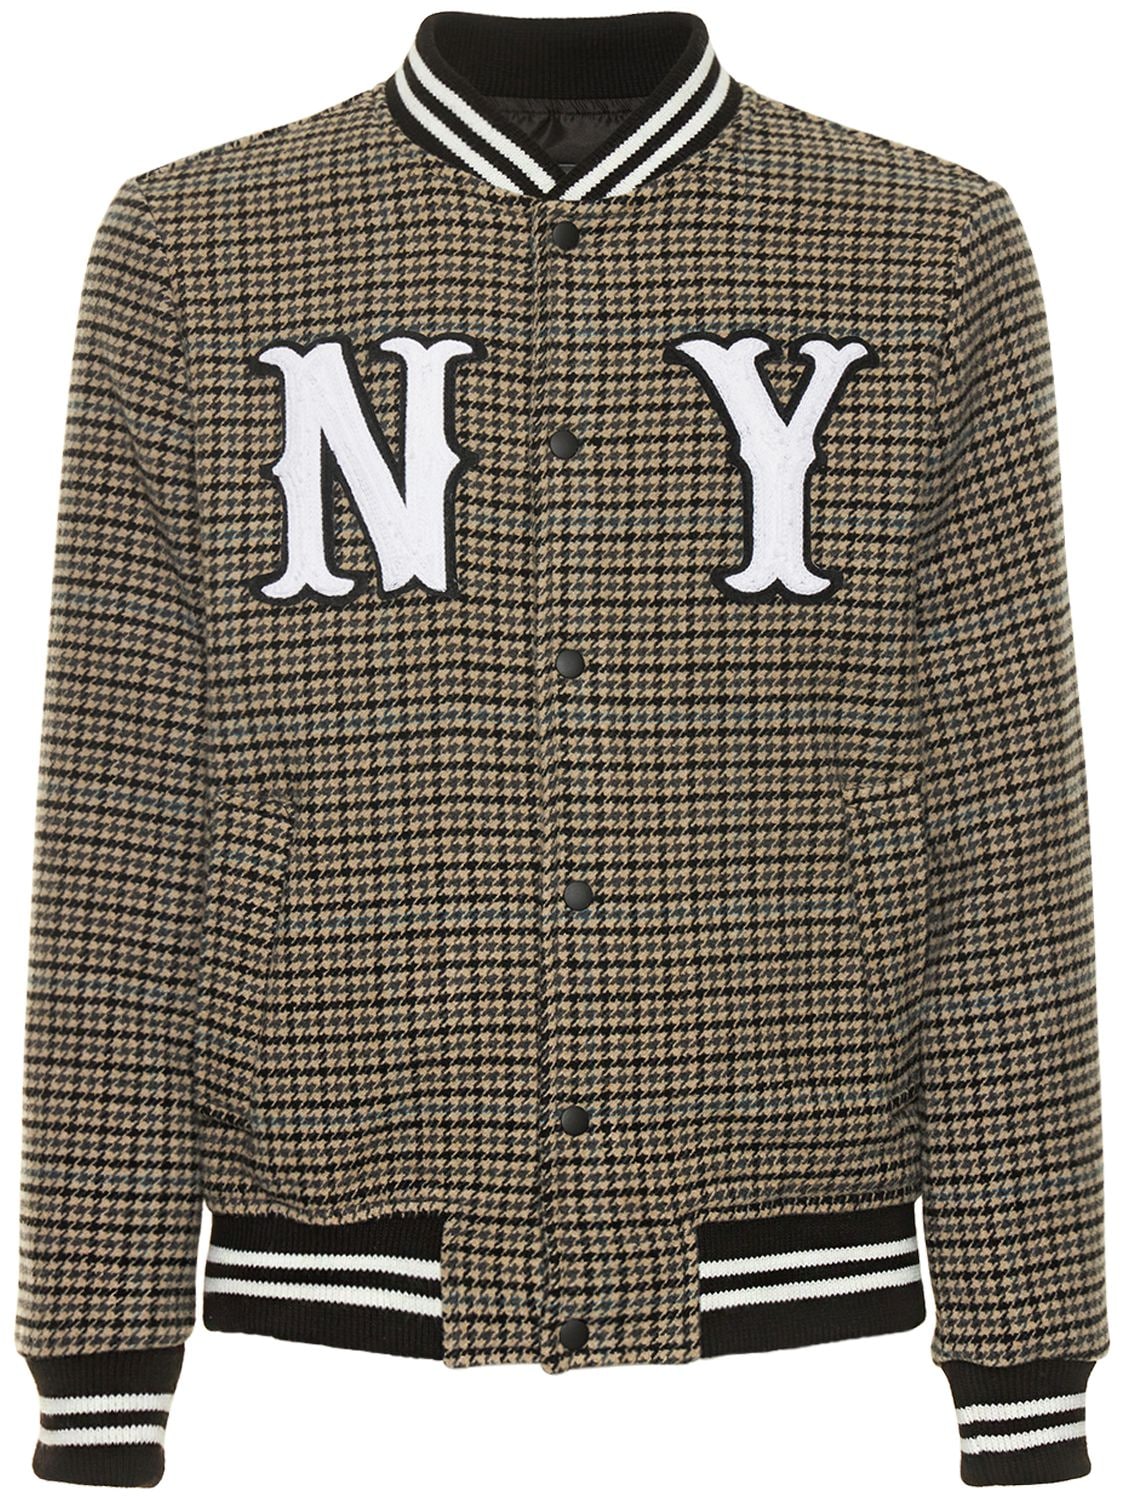 FRONT STREET 8 Wool Blend Varsity Jacket W/ Ny Patches